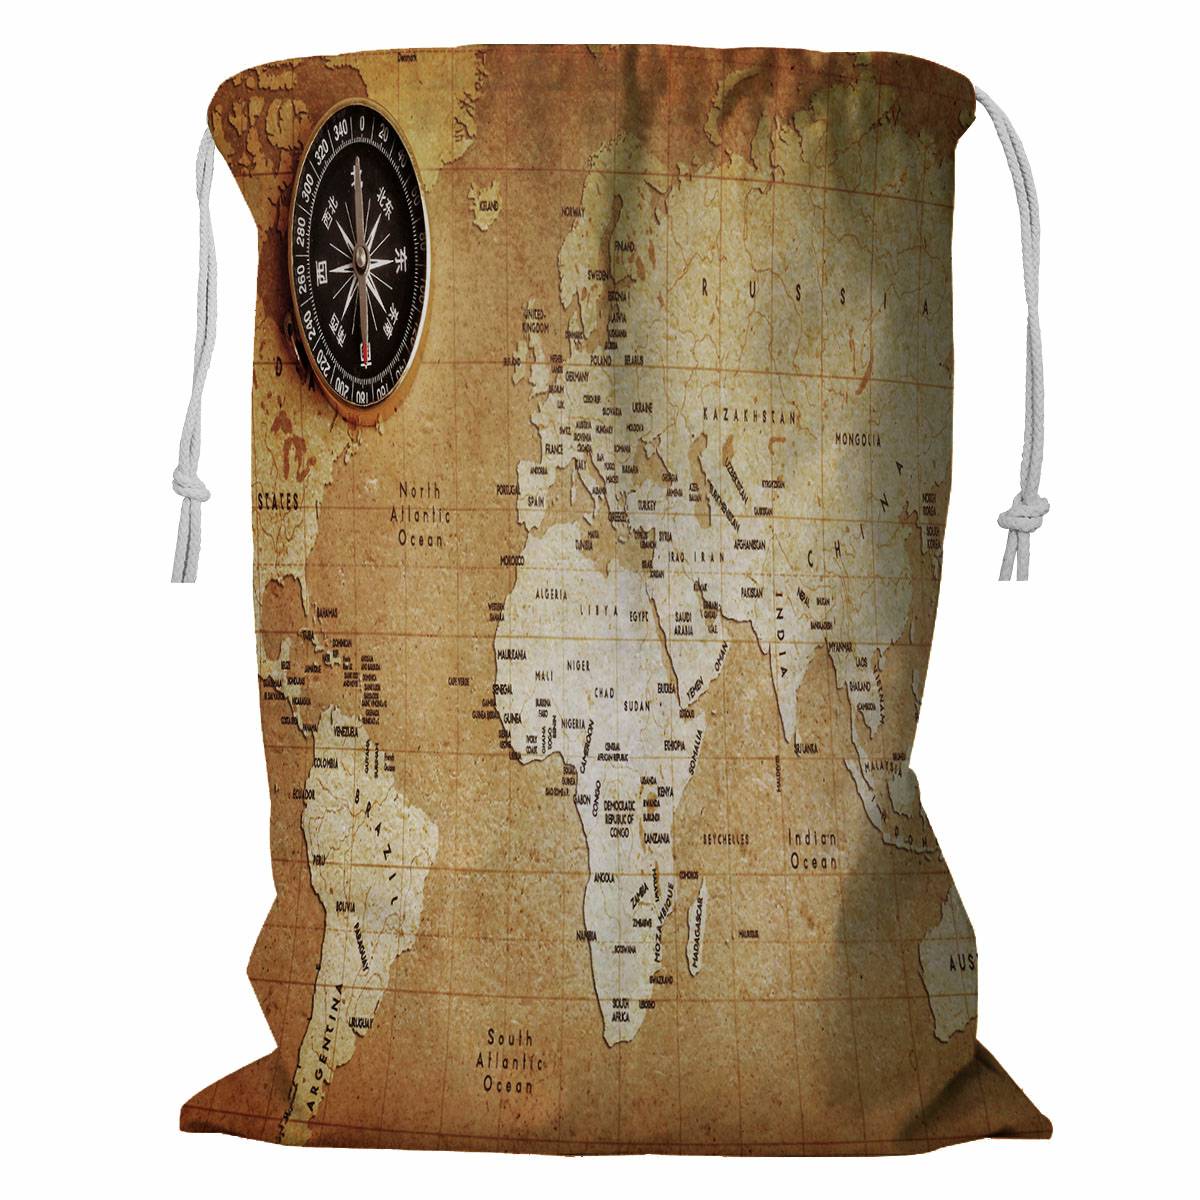 ECZJNT An old brass compass on a Treasure map Storage Basket Laundry Bag with Drawstring 18x24 Inch - image 1 of 2